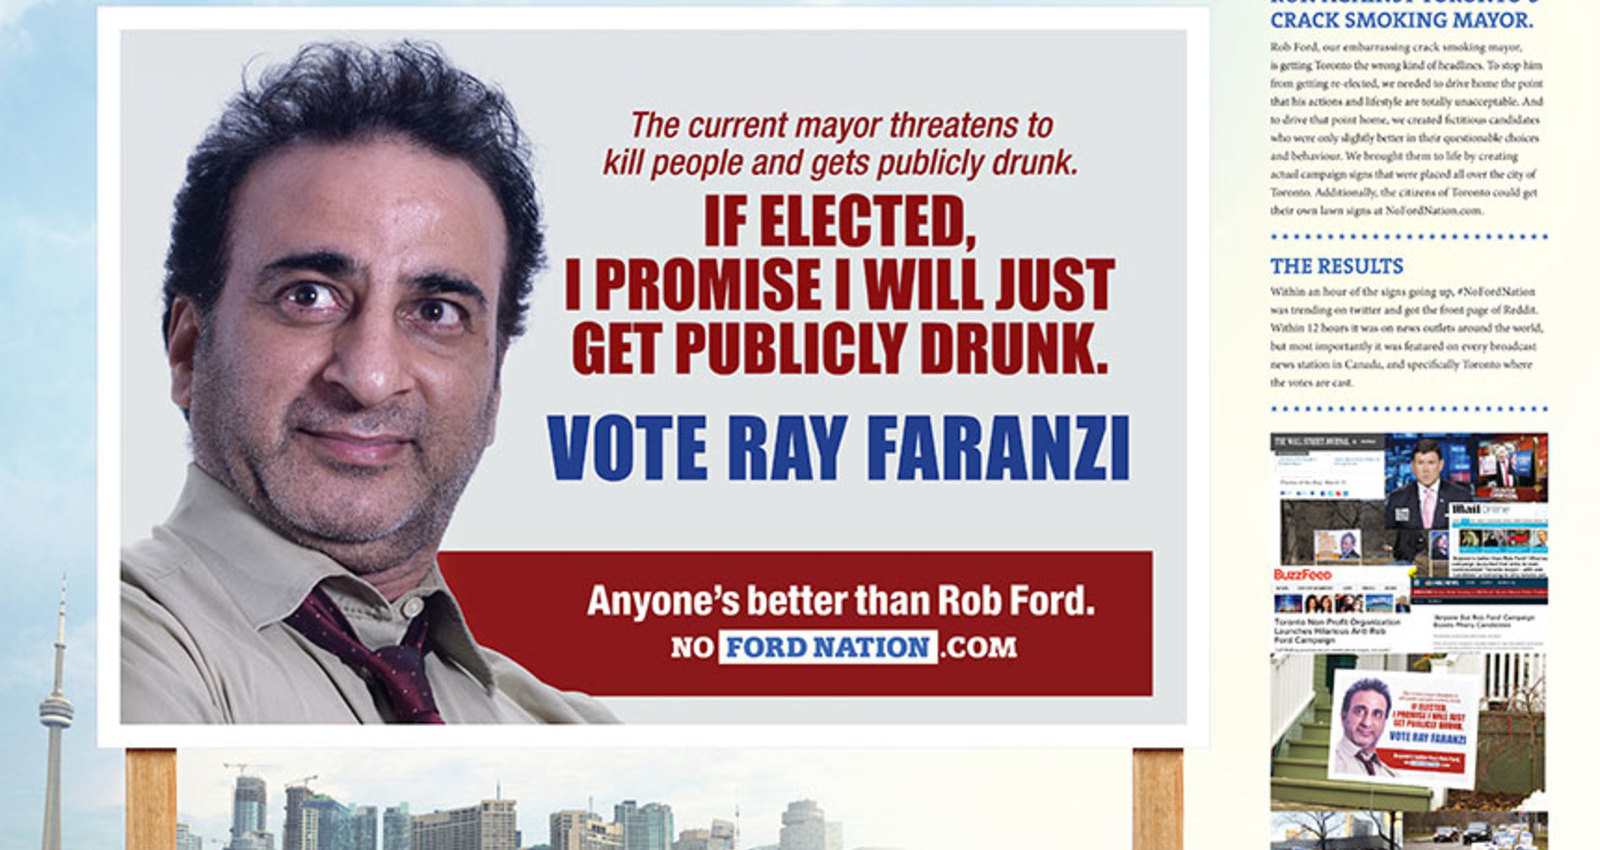 No Ford Nation Campaign Signs - Publicly Drunk